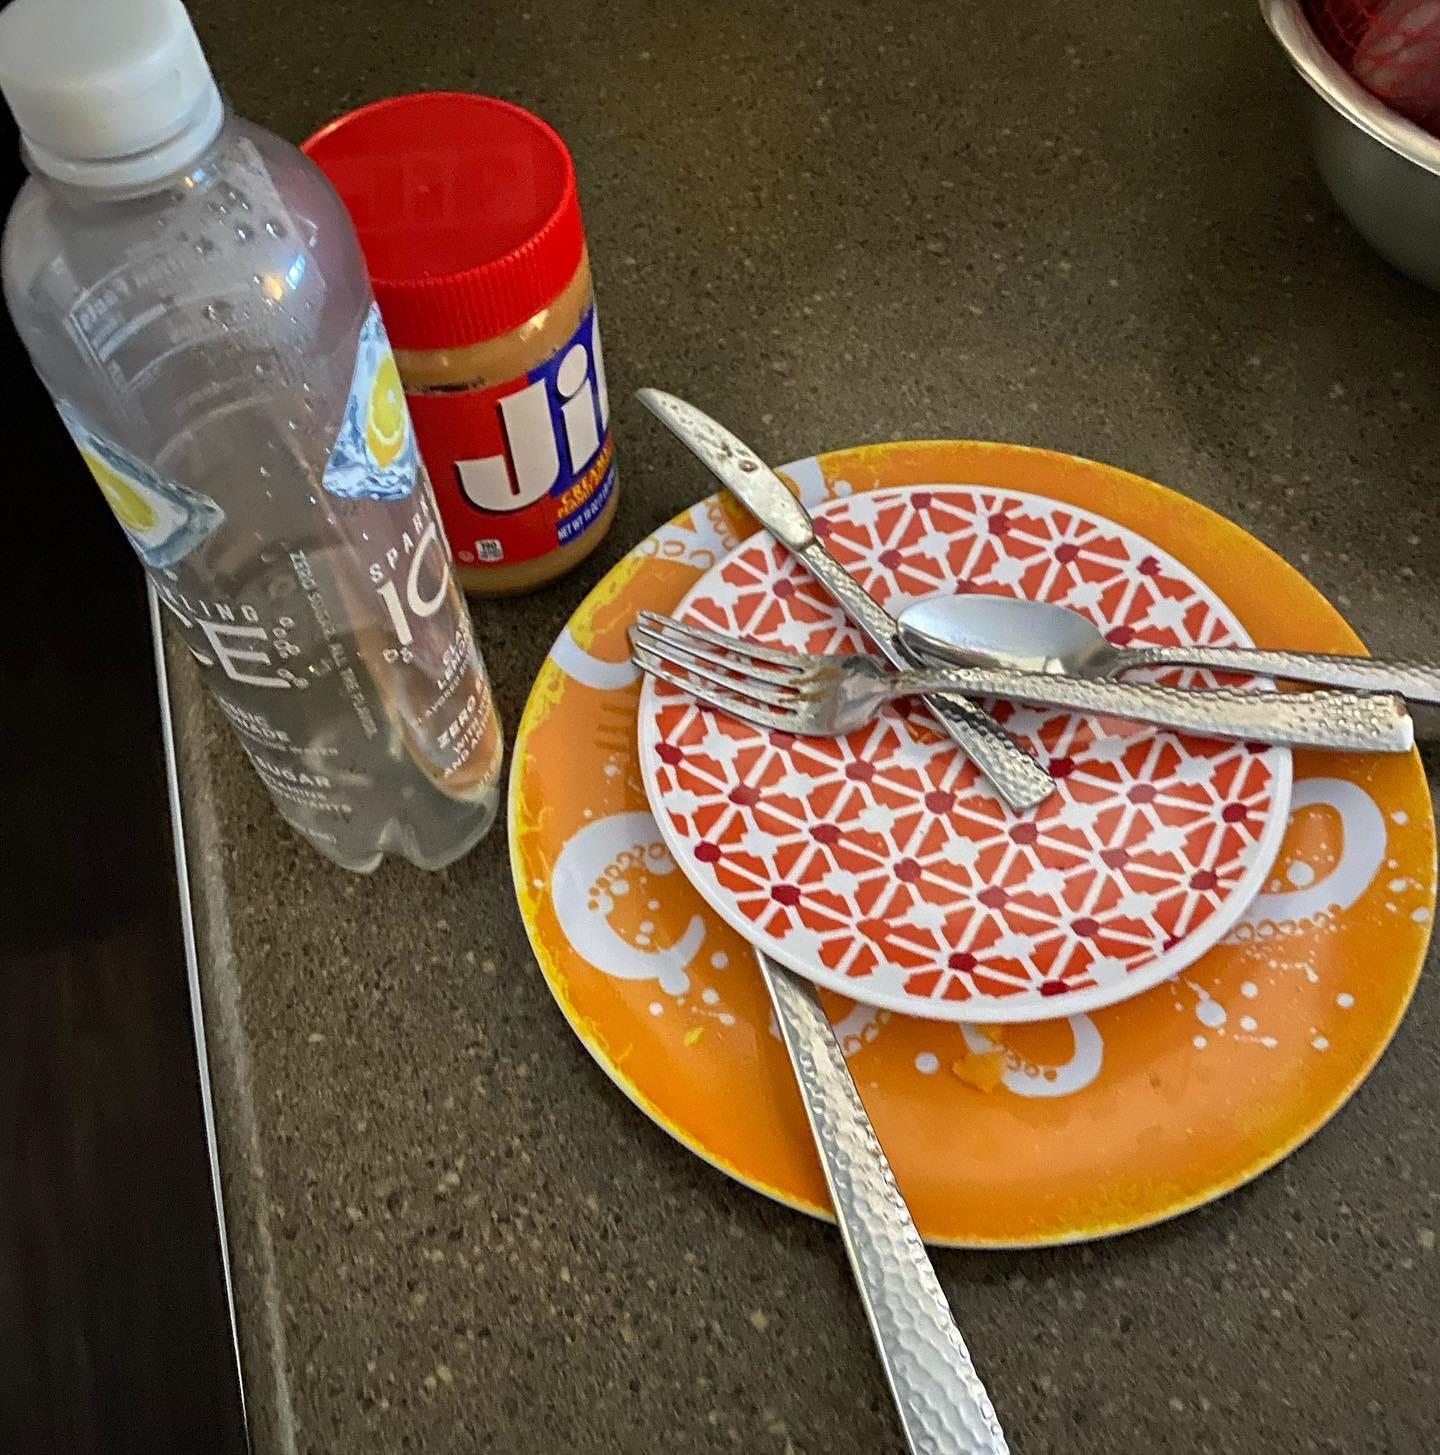 two dirty dishes and utensils plus empty water bottle and jar of peanut butter